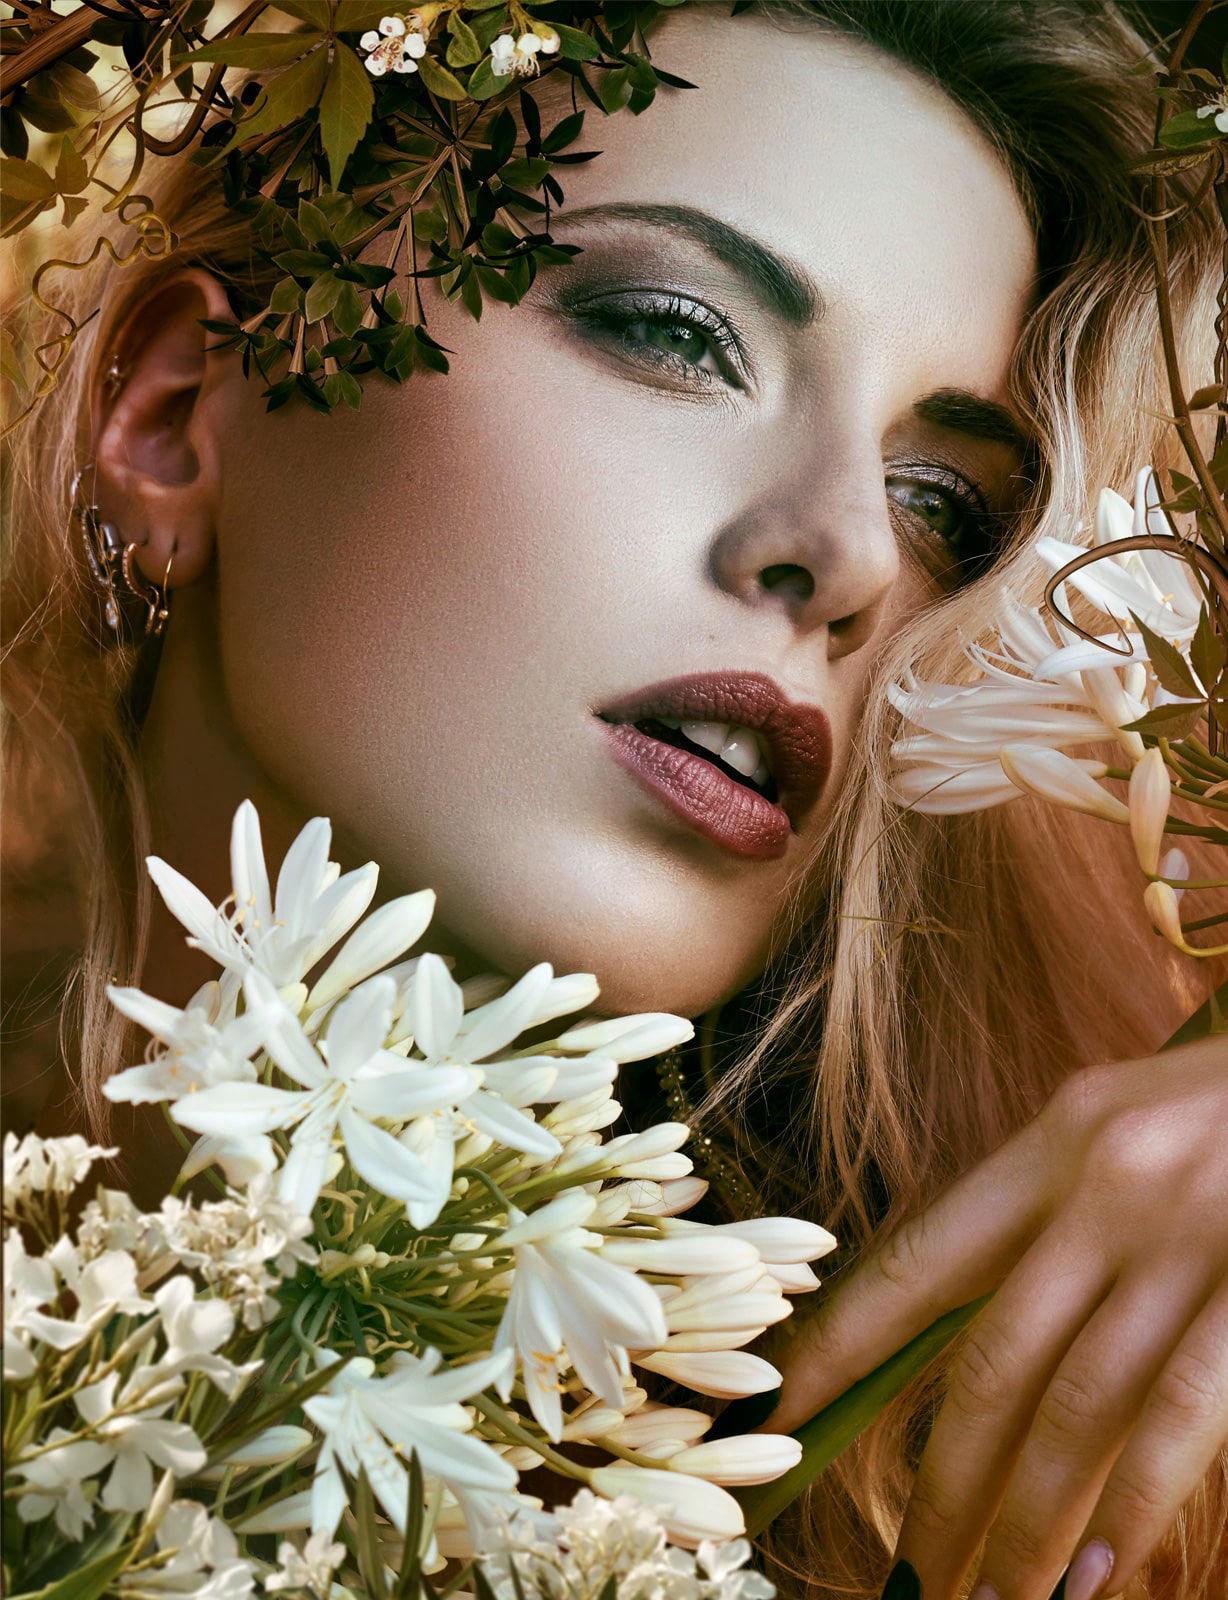 portrait fine art photography of a blonde model surrounded by flowers